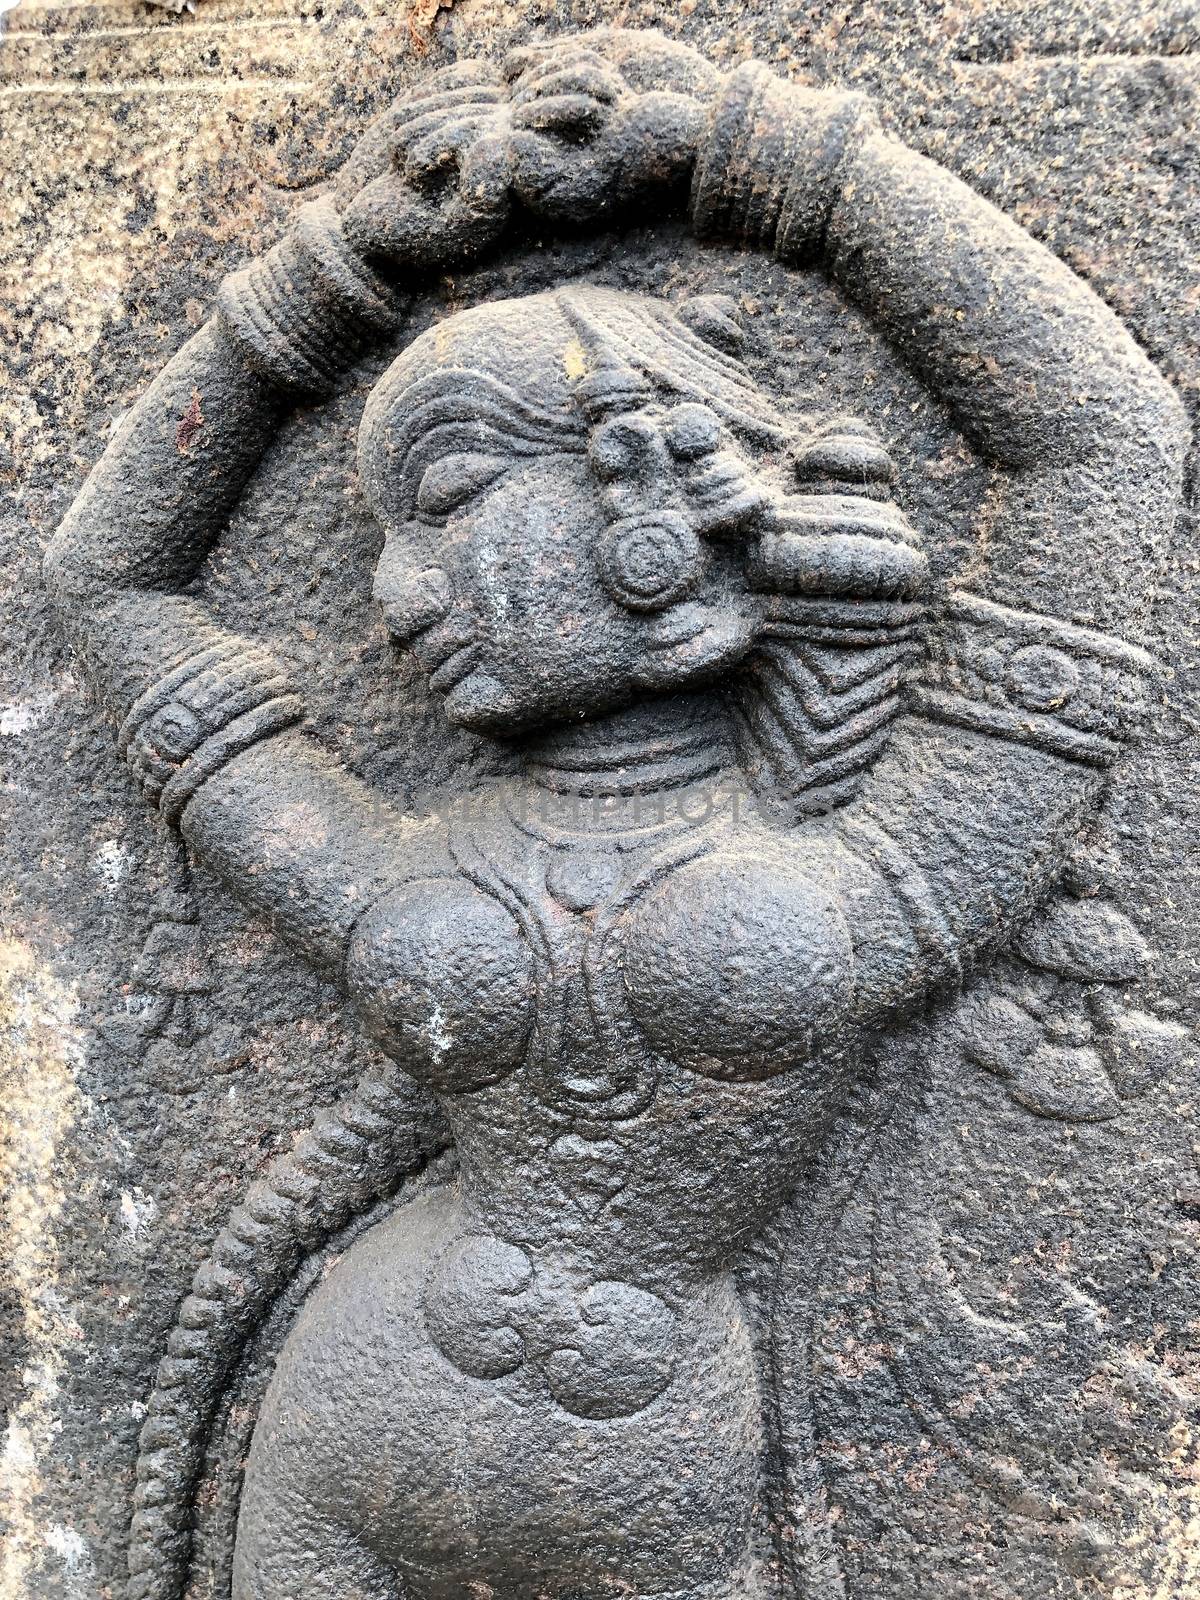 Sculpture of Woman posed dance steps. Bas relief sculpture carved in the stone walls at Shiva temple in Tamil nadu by prabhakaran851